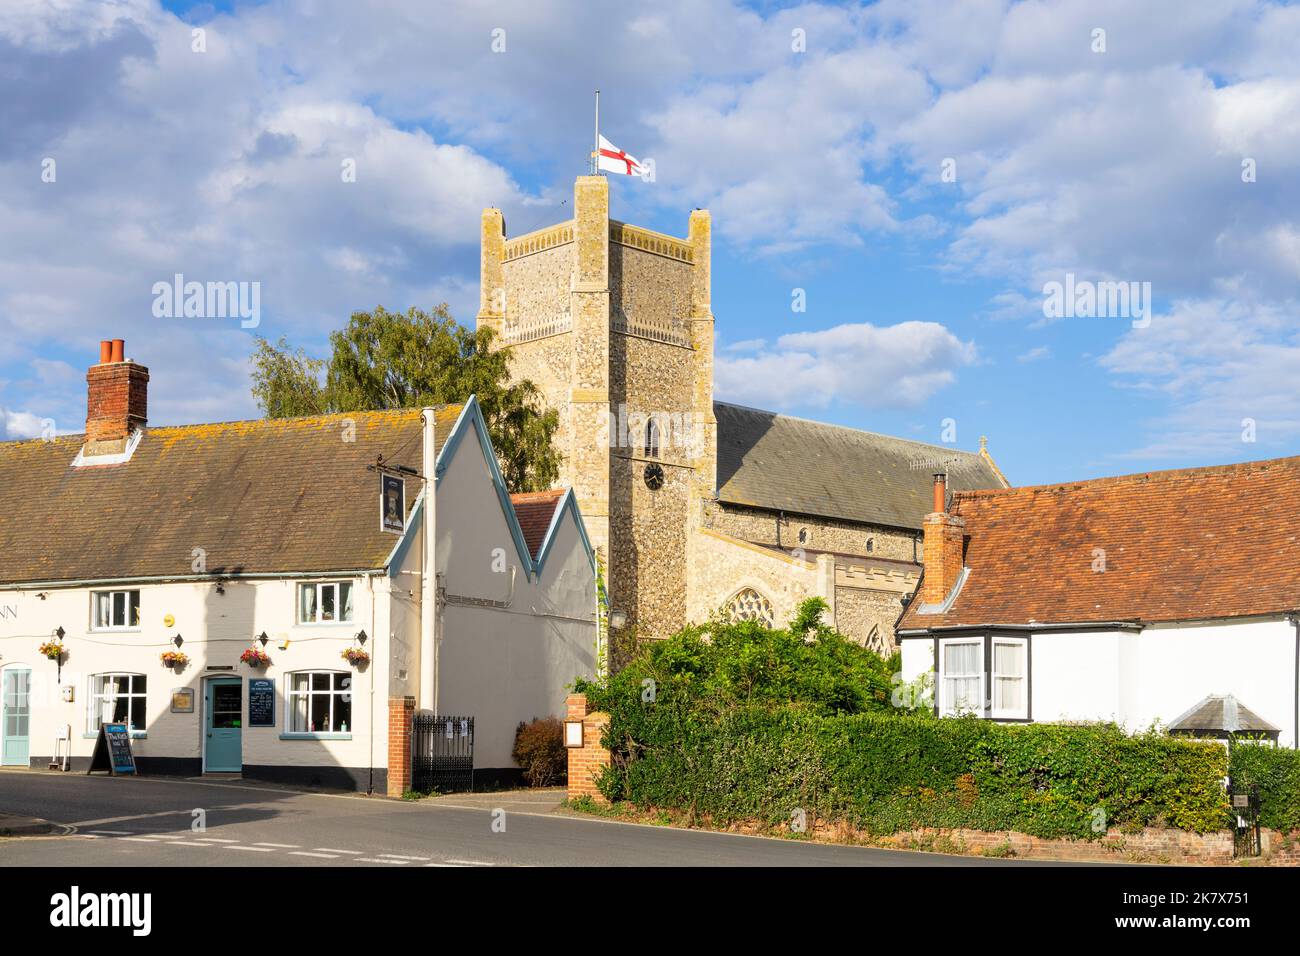 The Kings Head Inn and St Bartholomew's Church in the village of Orford Suffolk England UK Europe Stock Photo